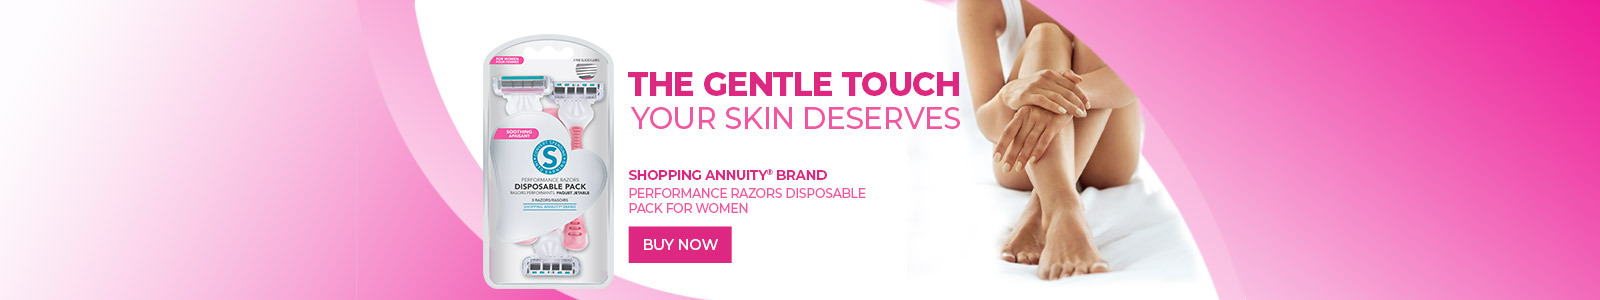 The Gentle Touch Your Skin Deserves Buy Now